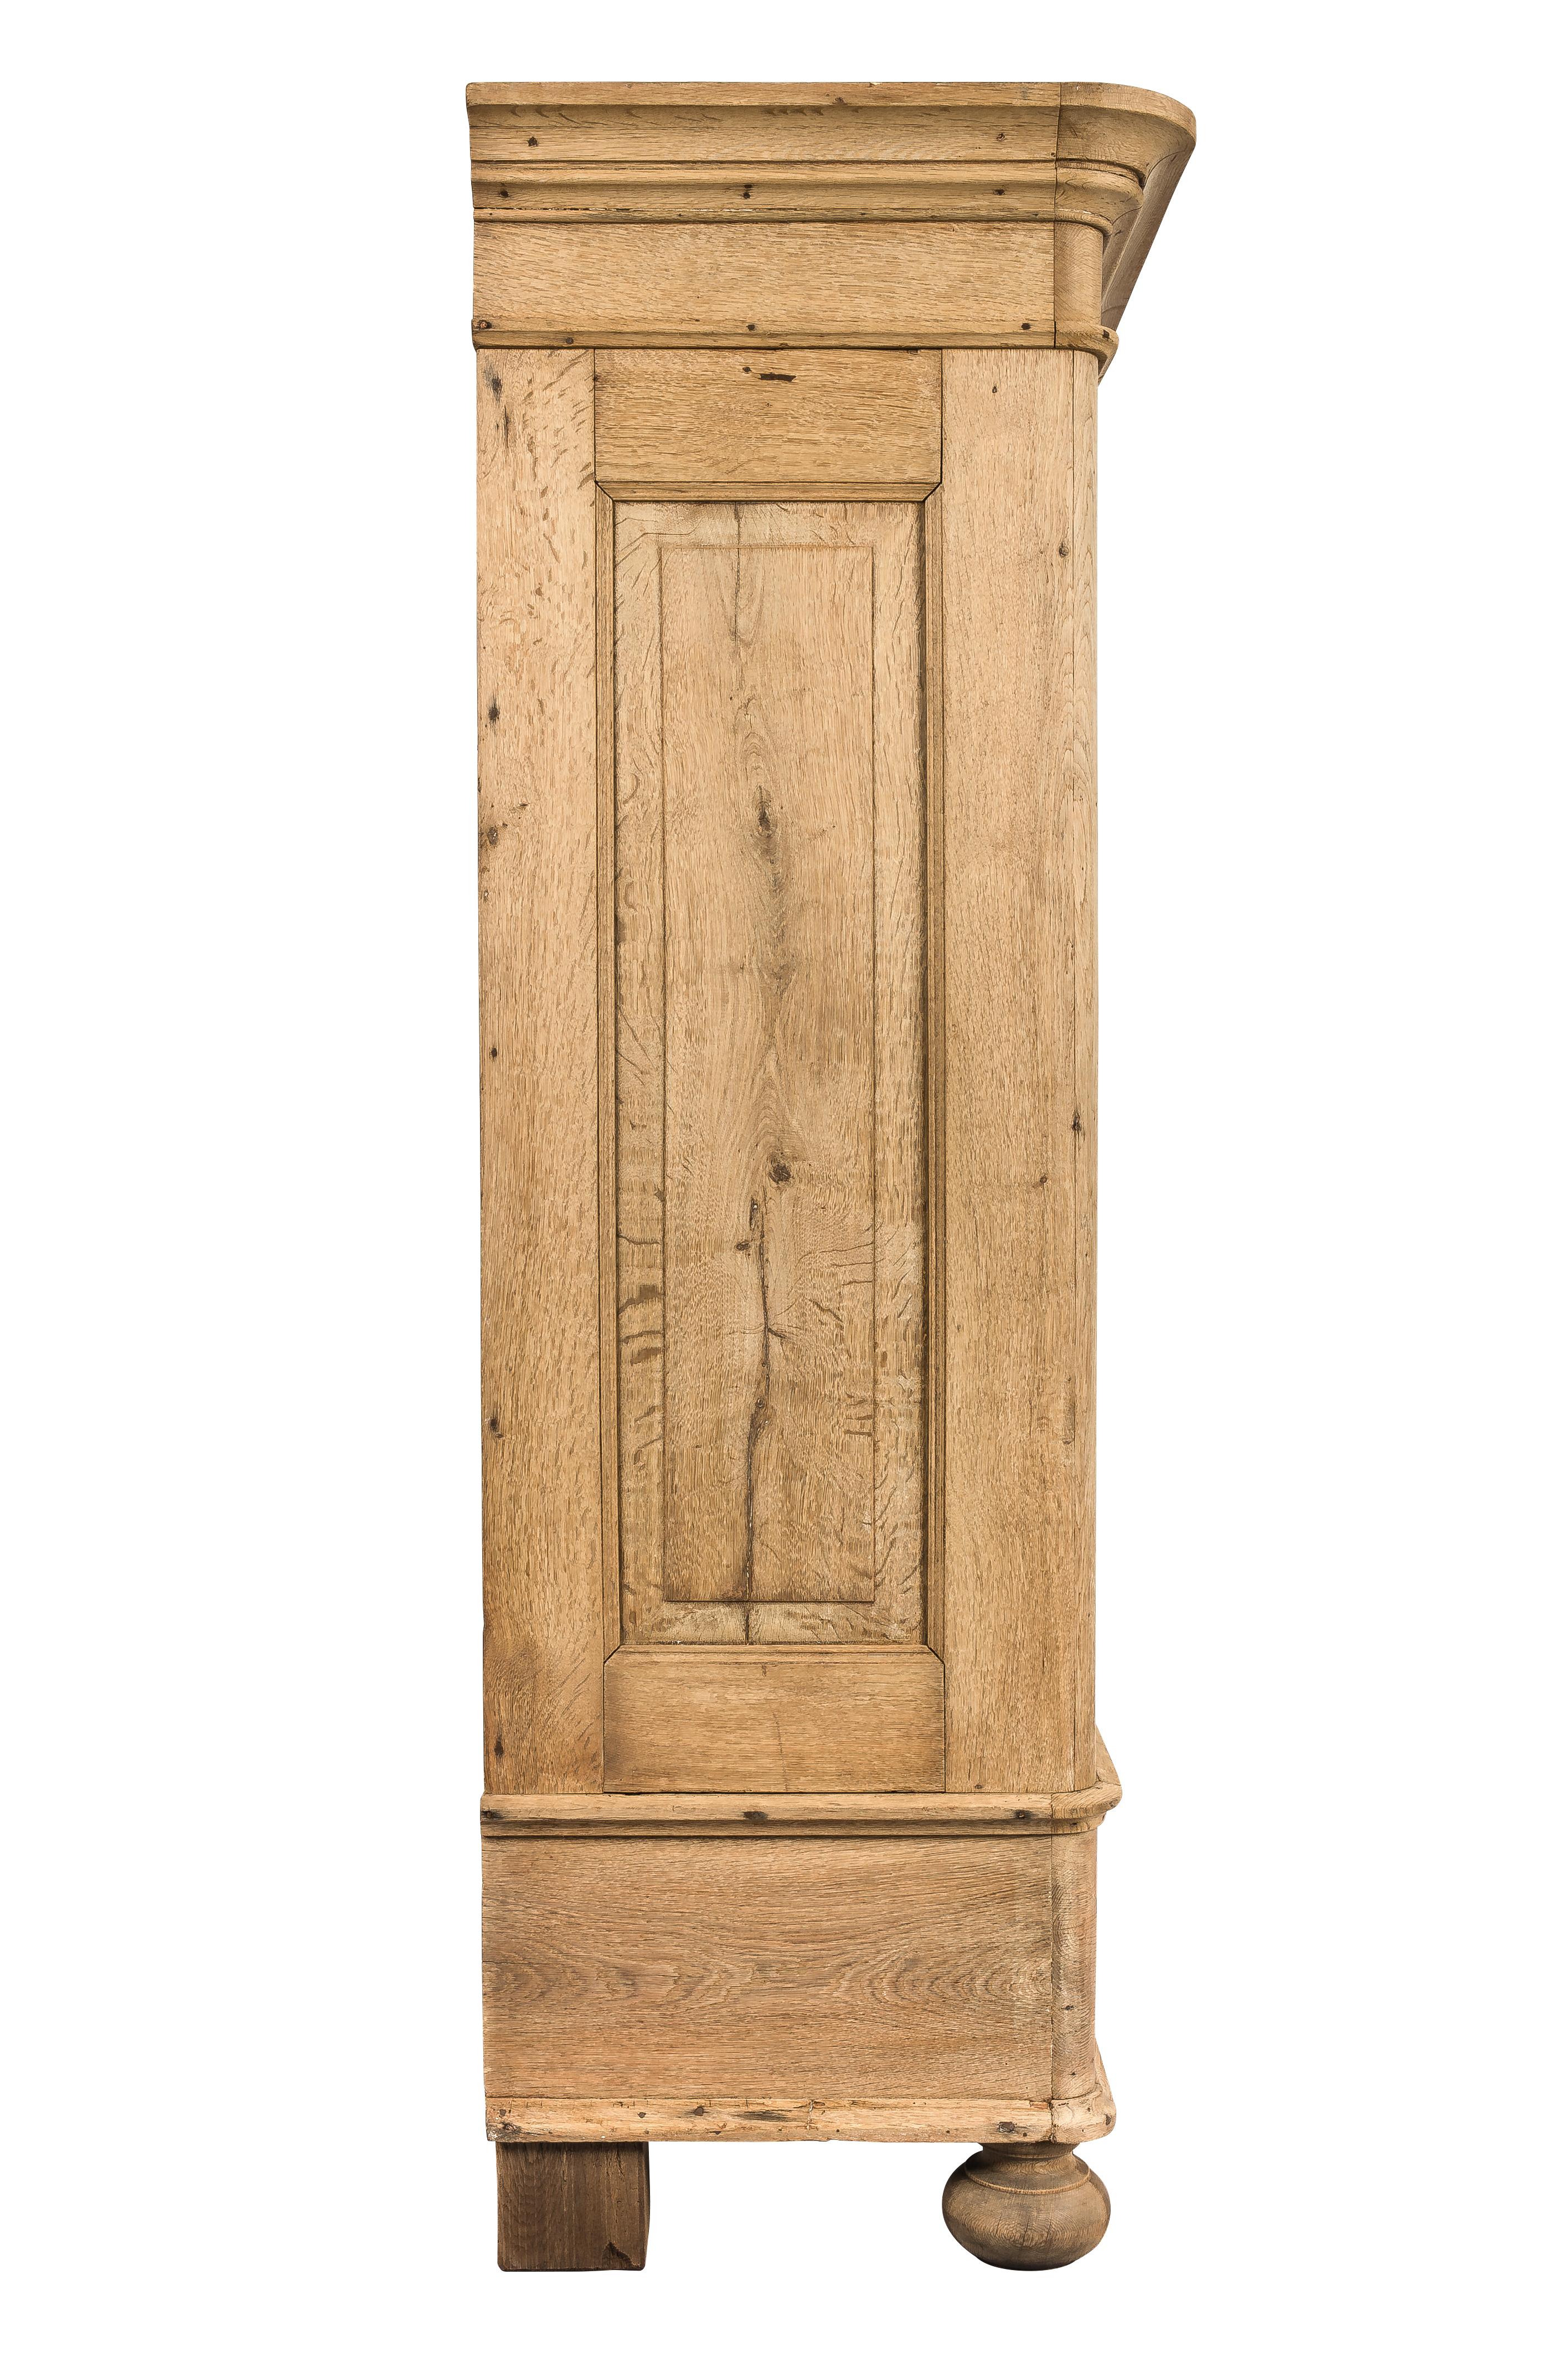 Forged Antique Mid-19th Century German Solid Stripped Oak Two-Door Cabinet